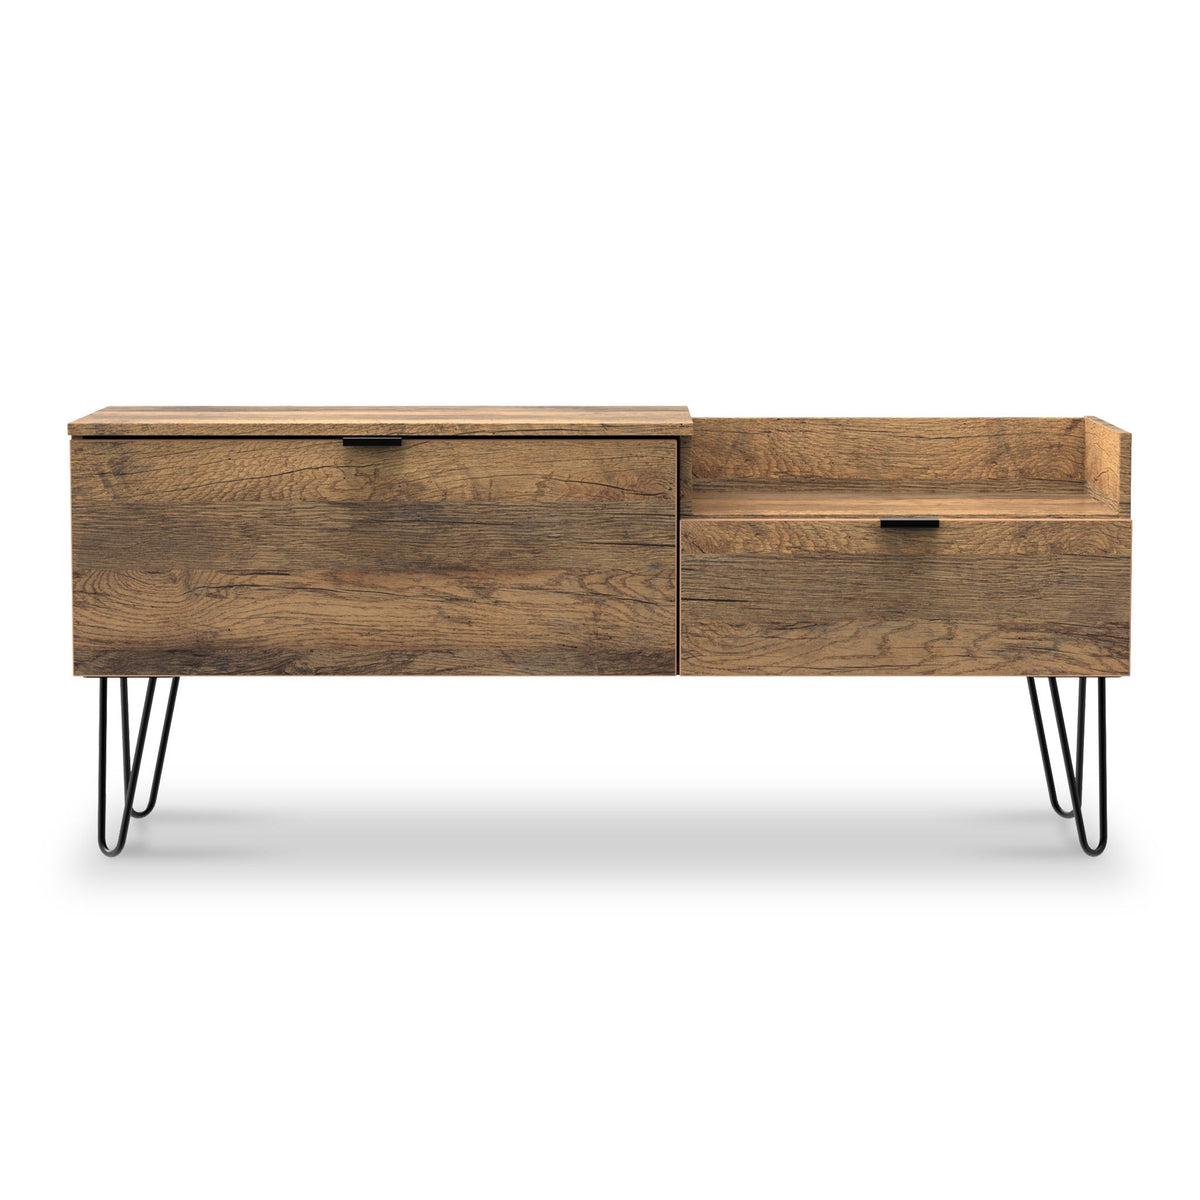 Moreno Rustic Oak TV Console Unit with Black Hairpin Legs from Roseland Furniture